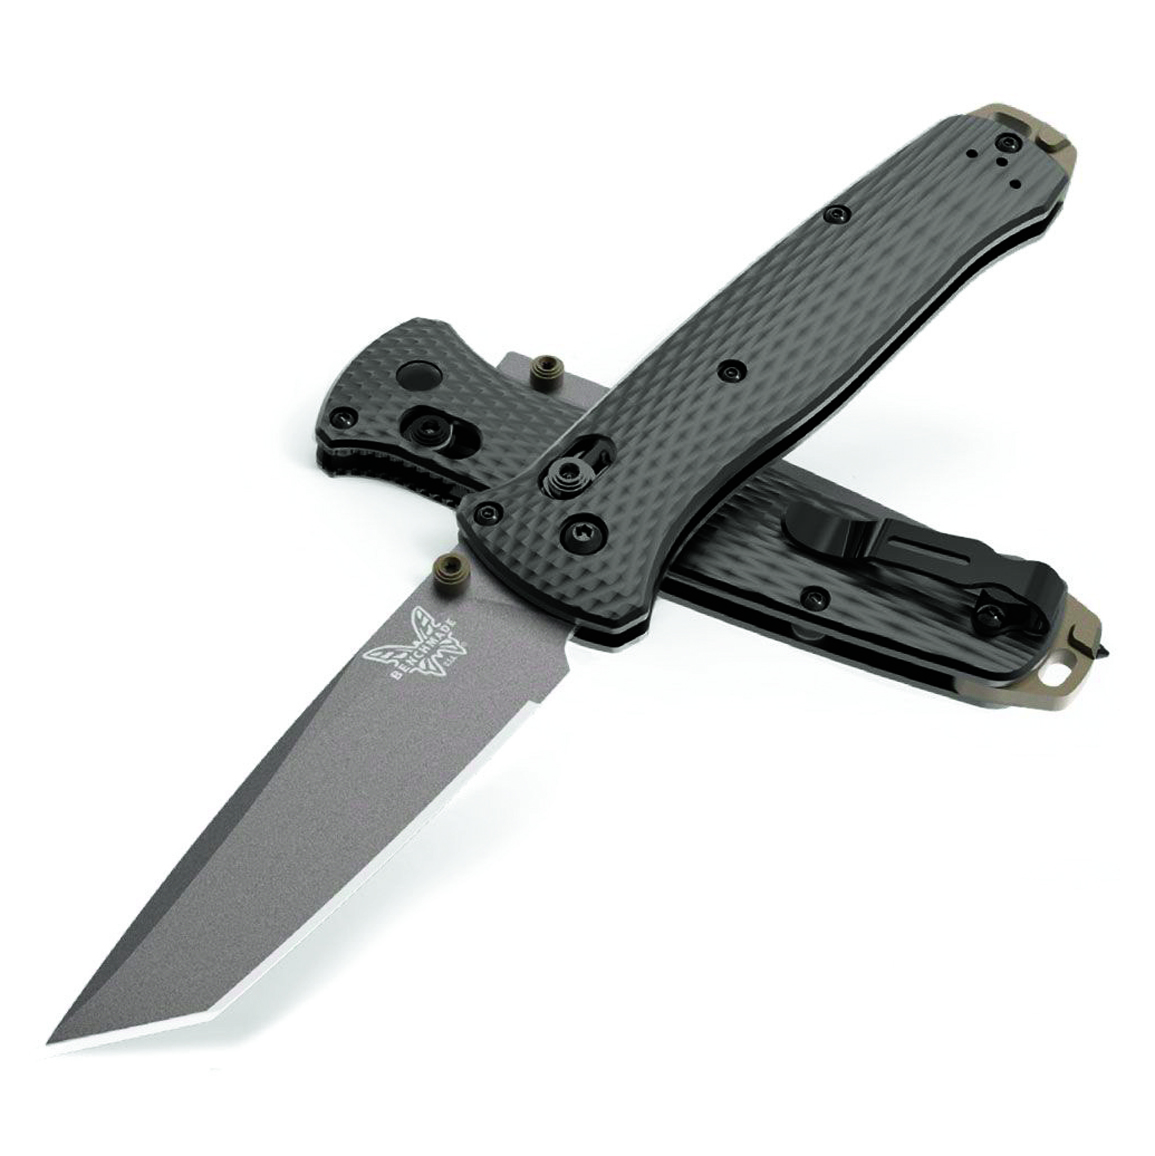 Benchmade 537GY-03 Bailout Folding Knife, Storm Gray